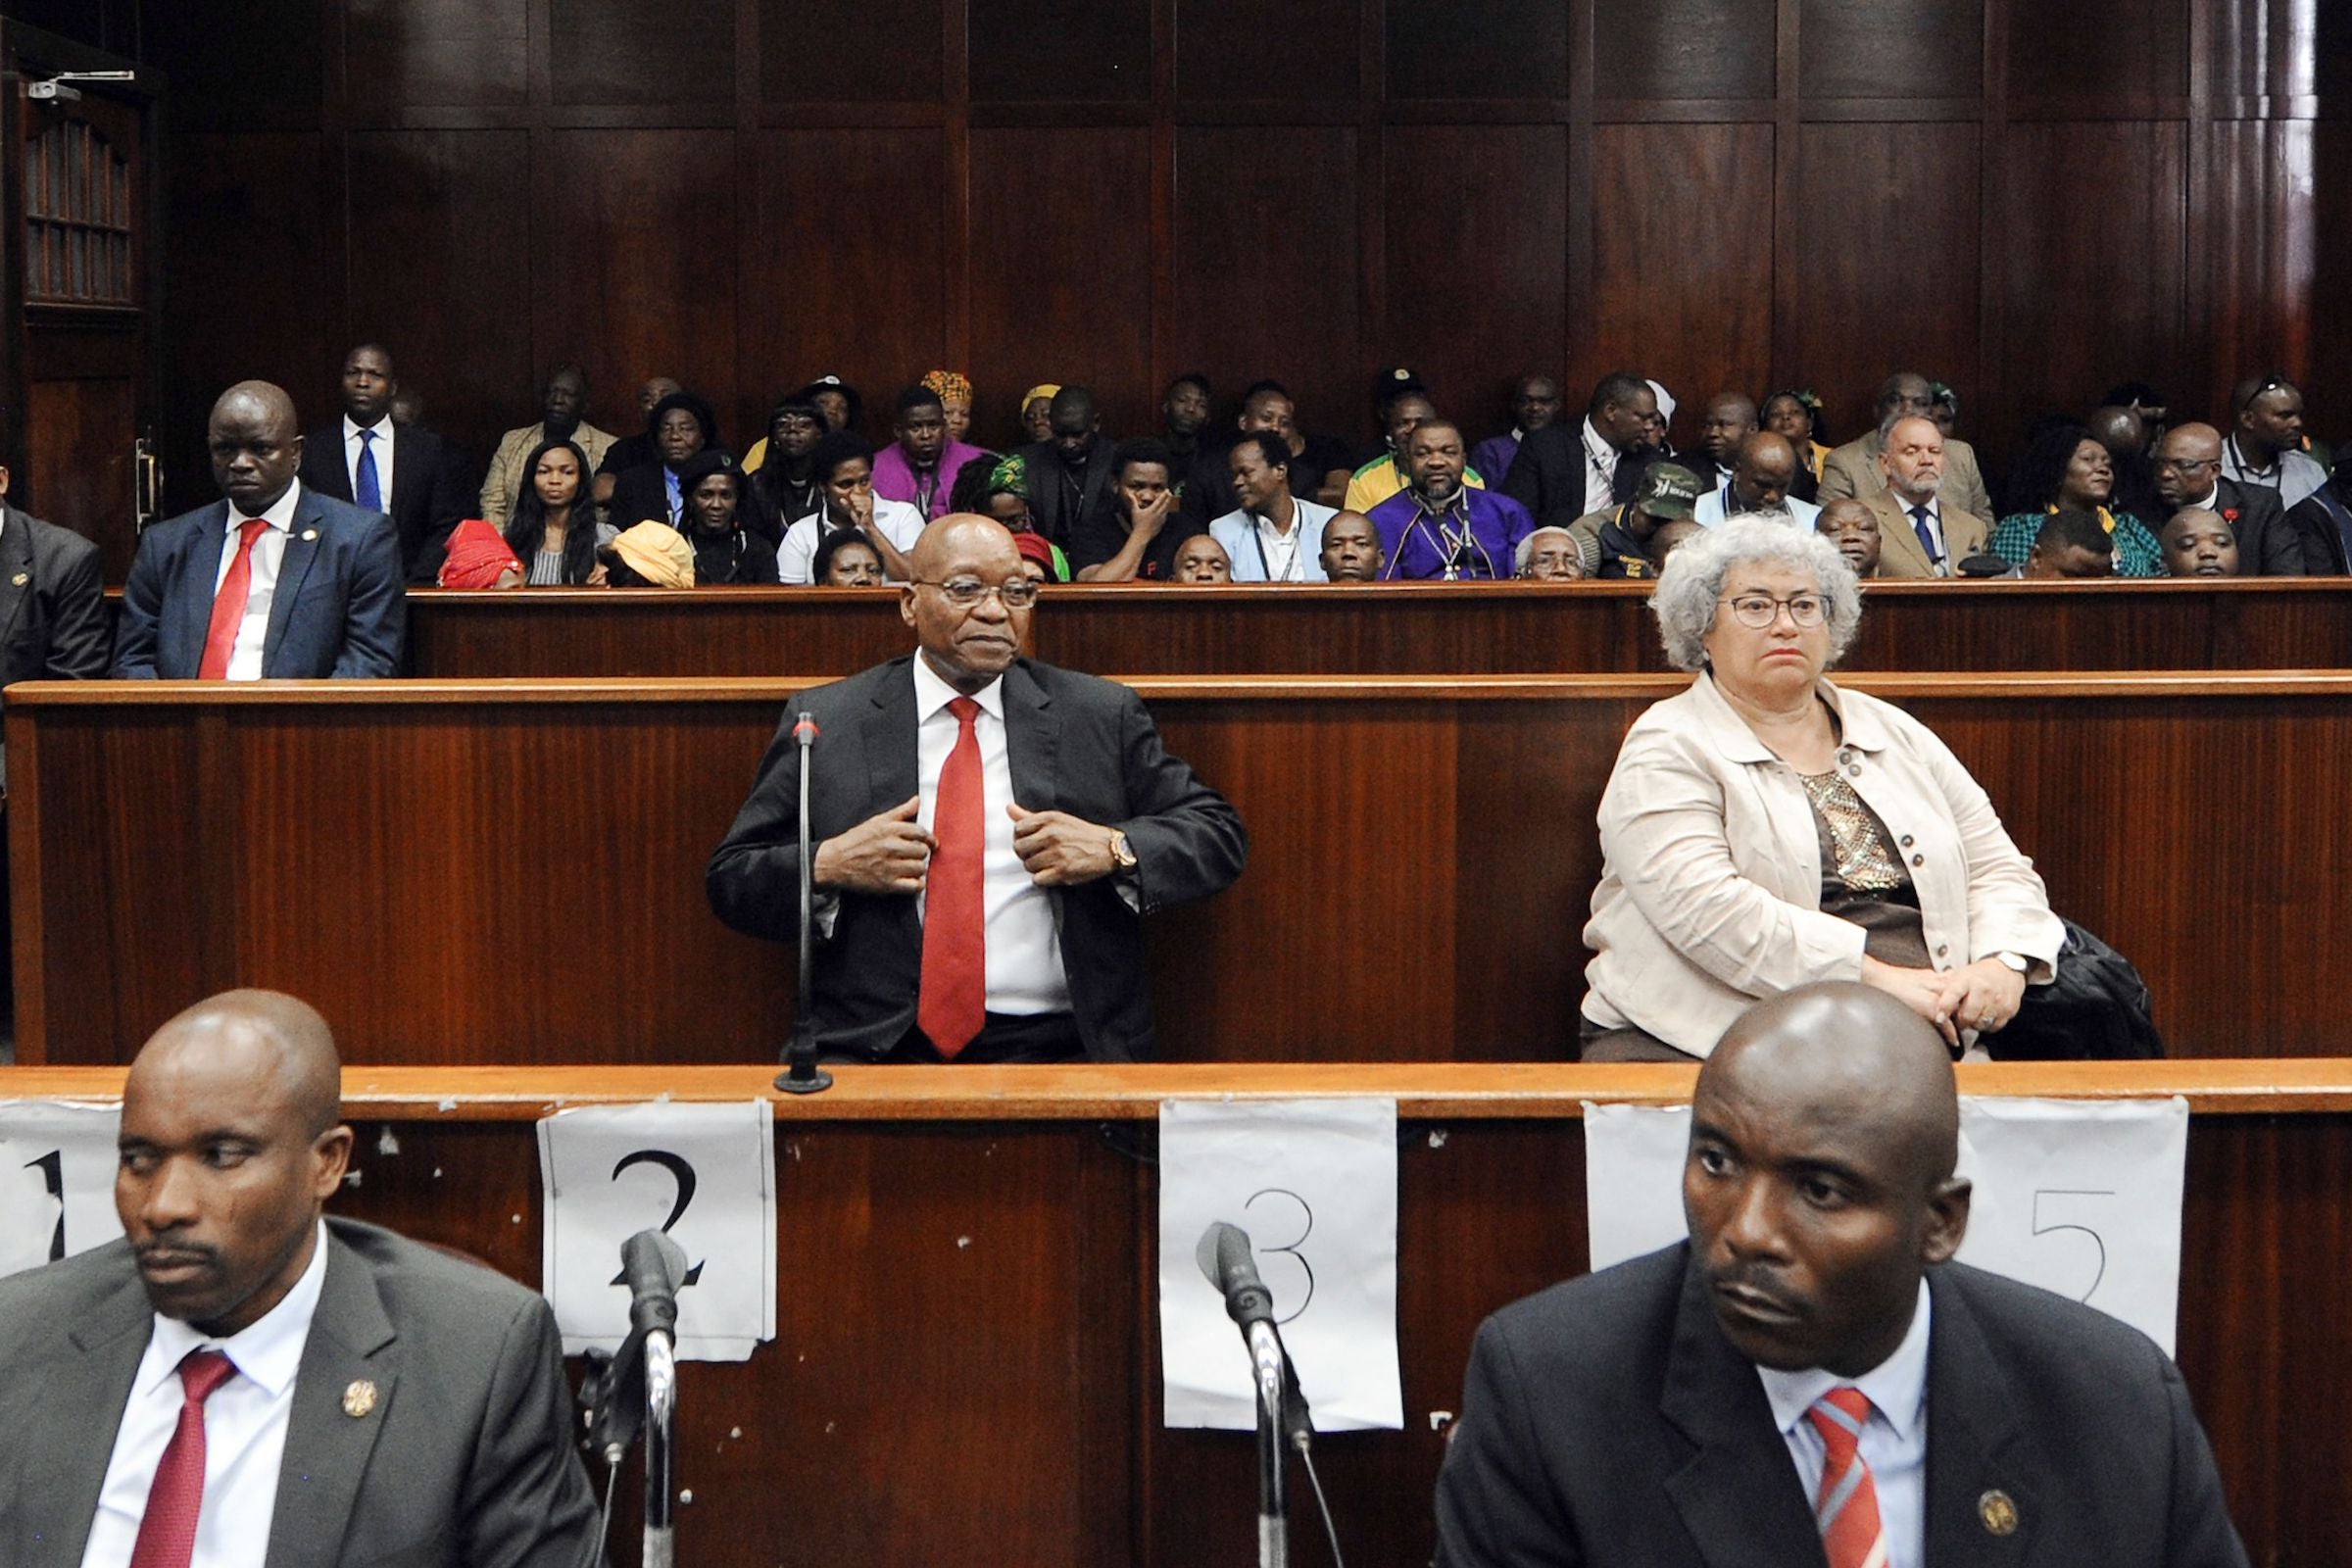 Jacob Zuma, former president, appeared in court this month on corruption charges